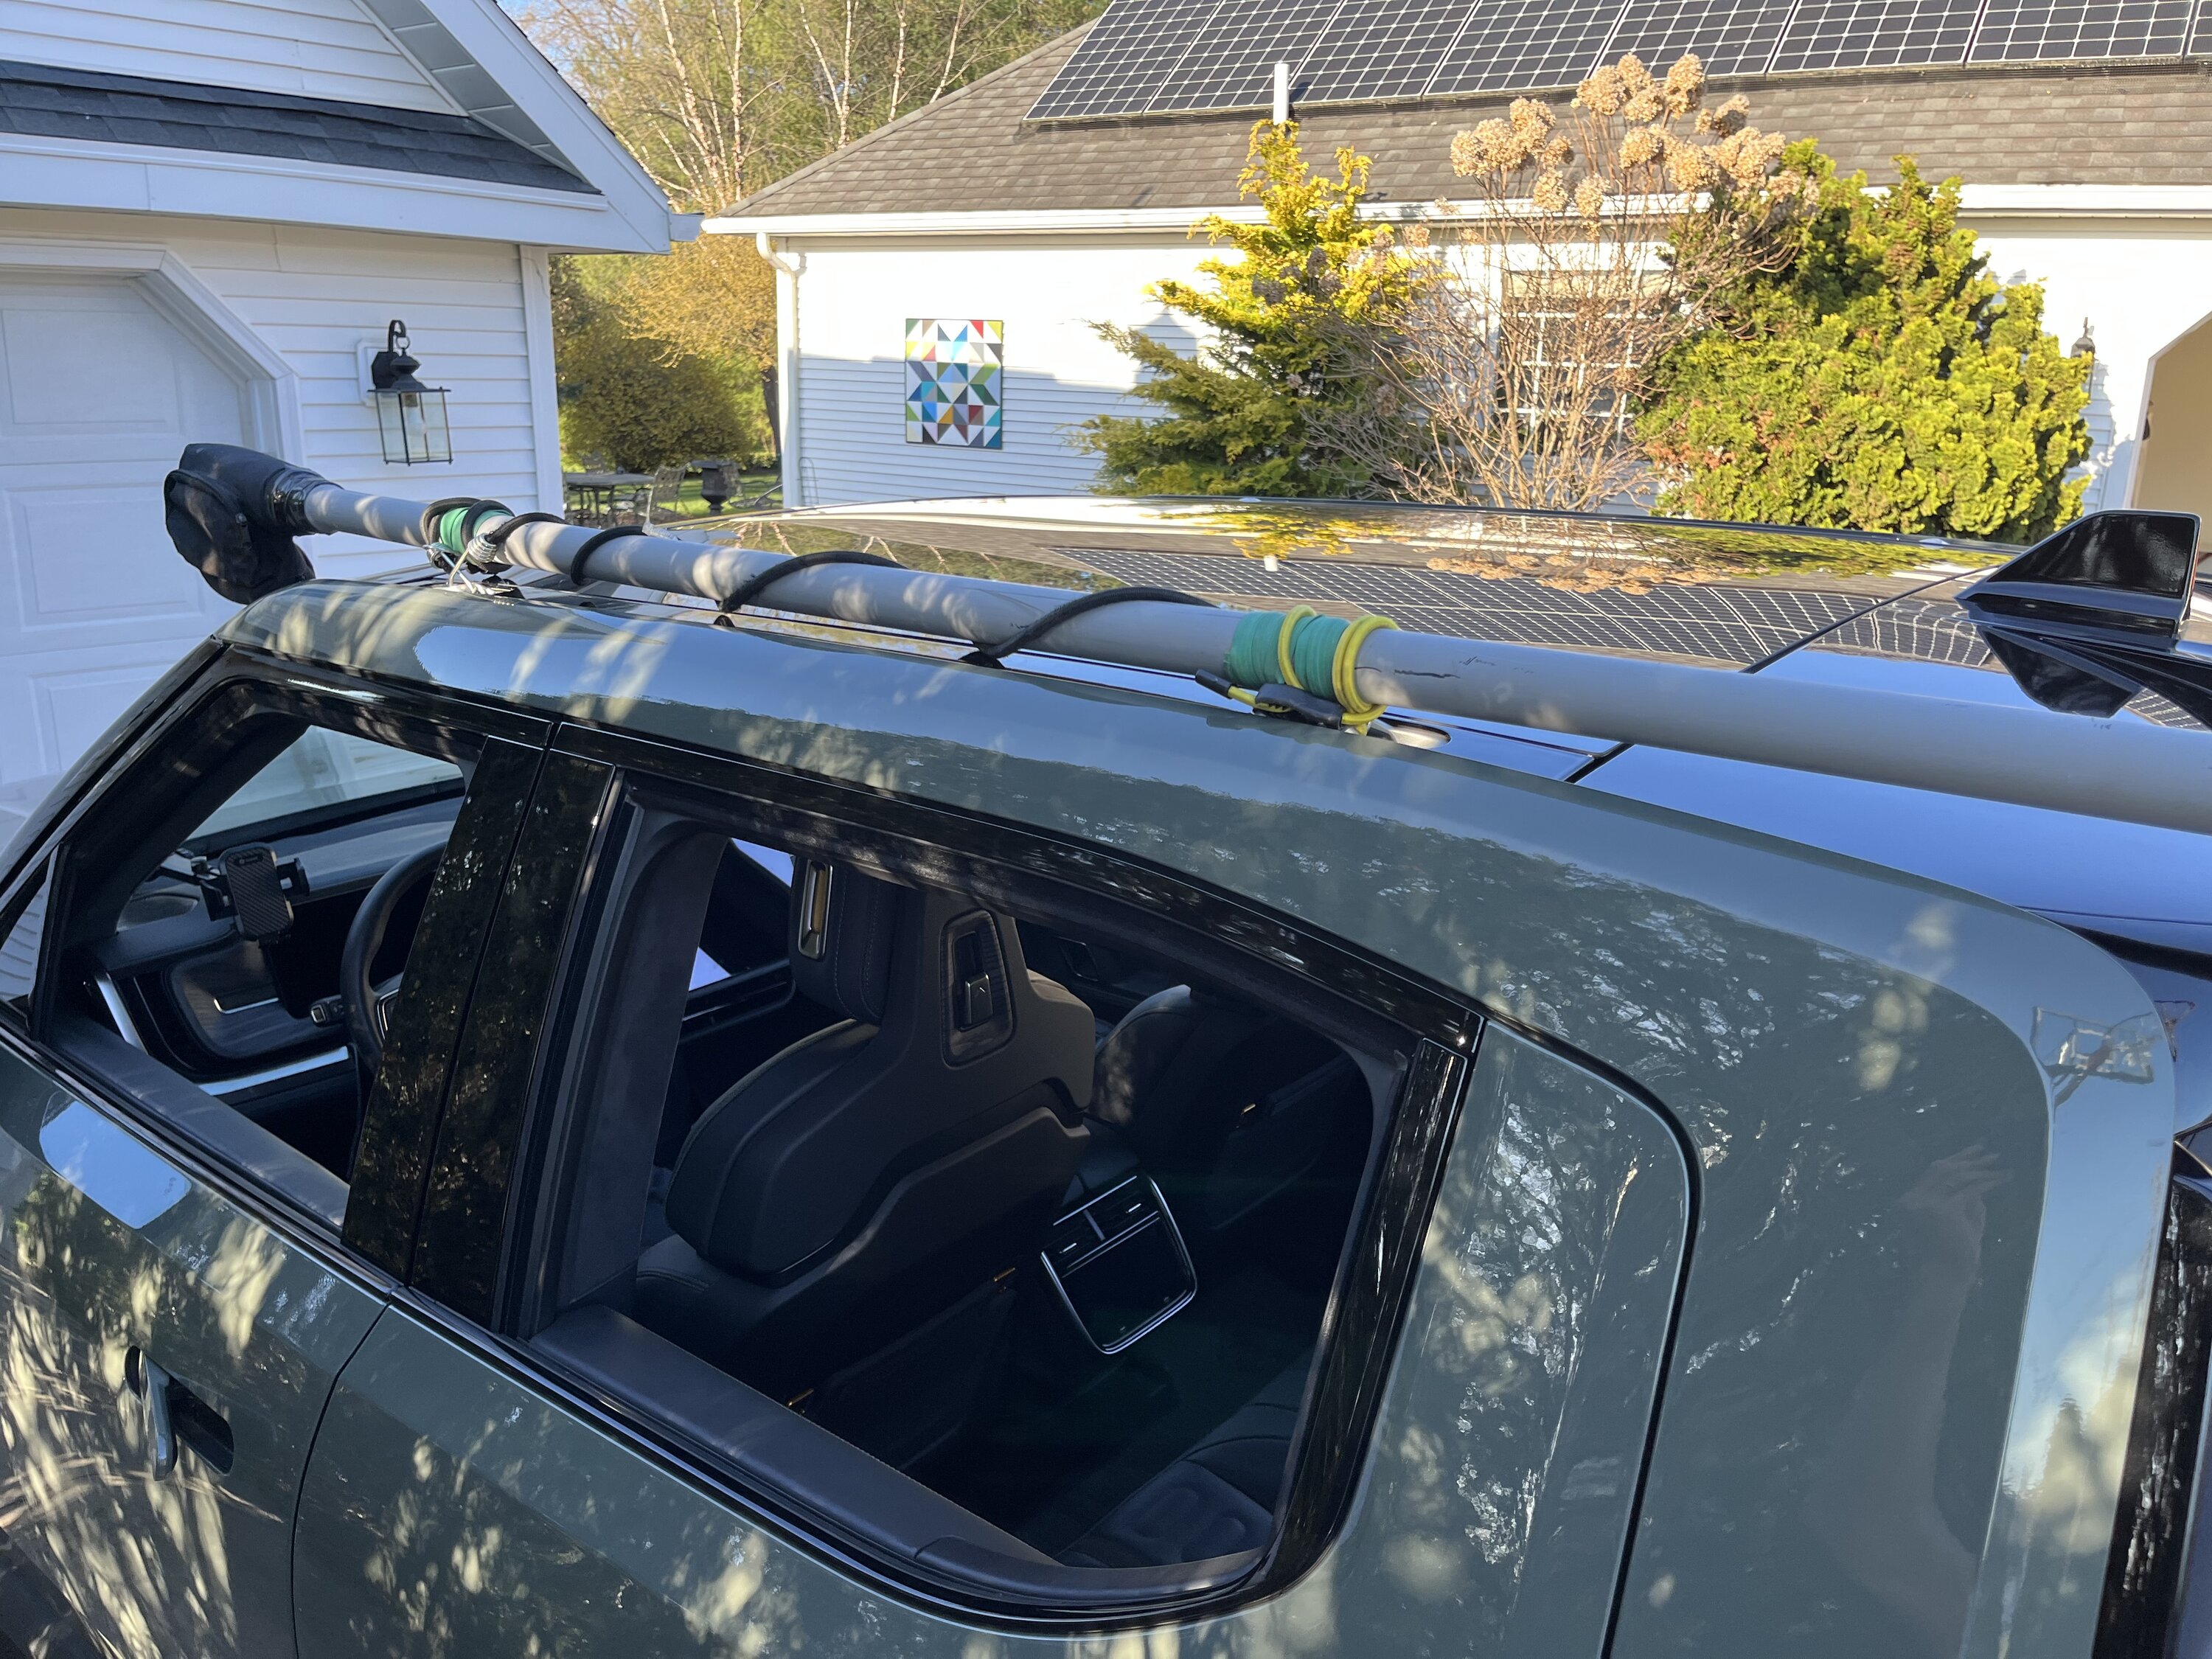 Any ideas for truck bed fishing rod holder?